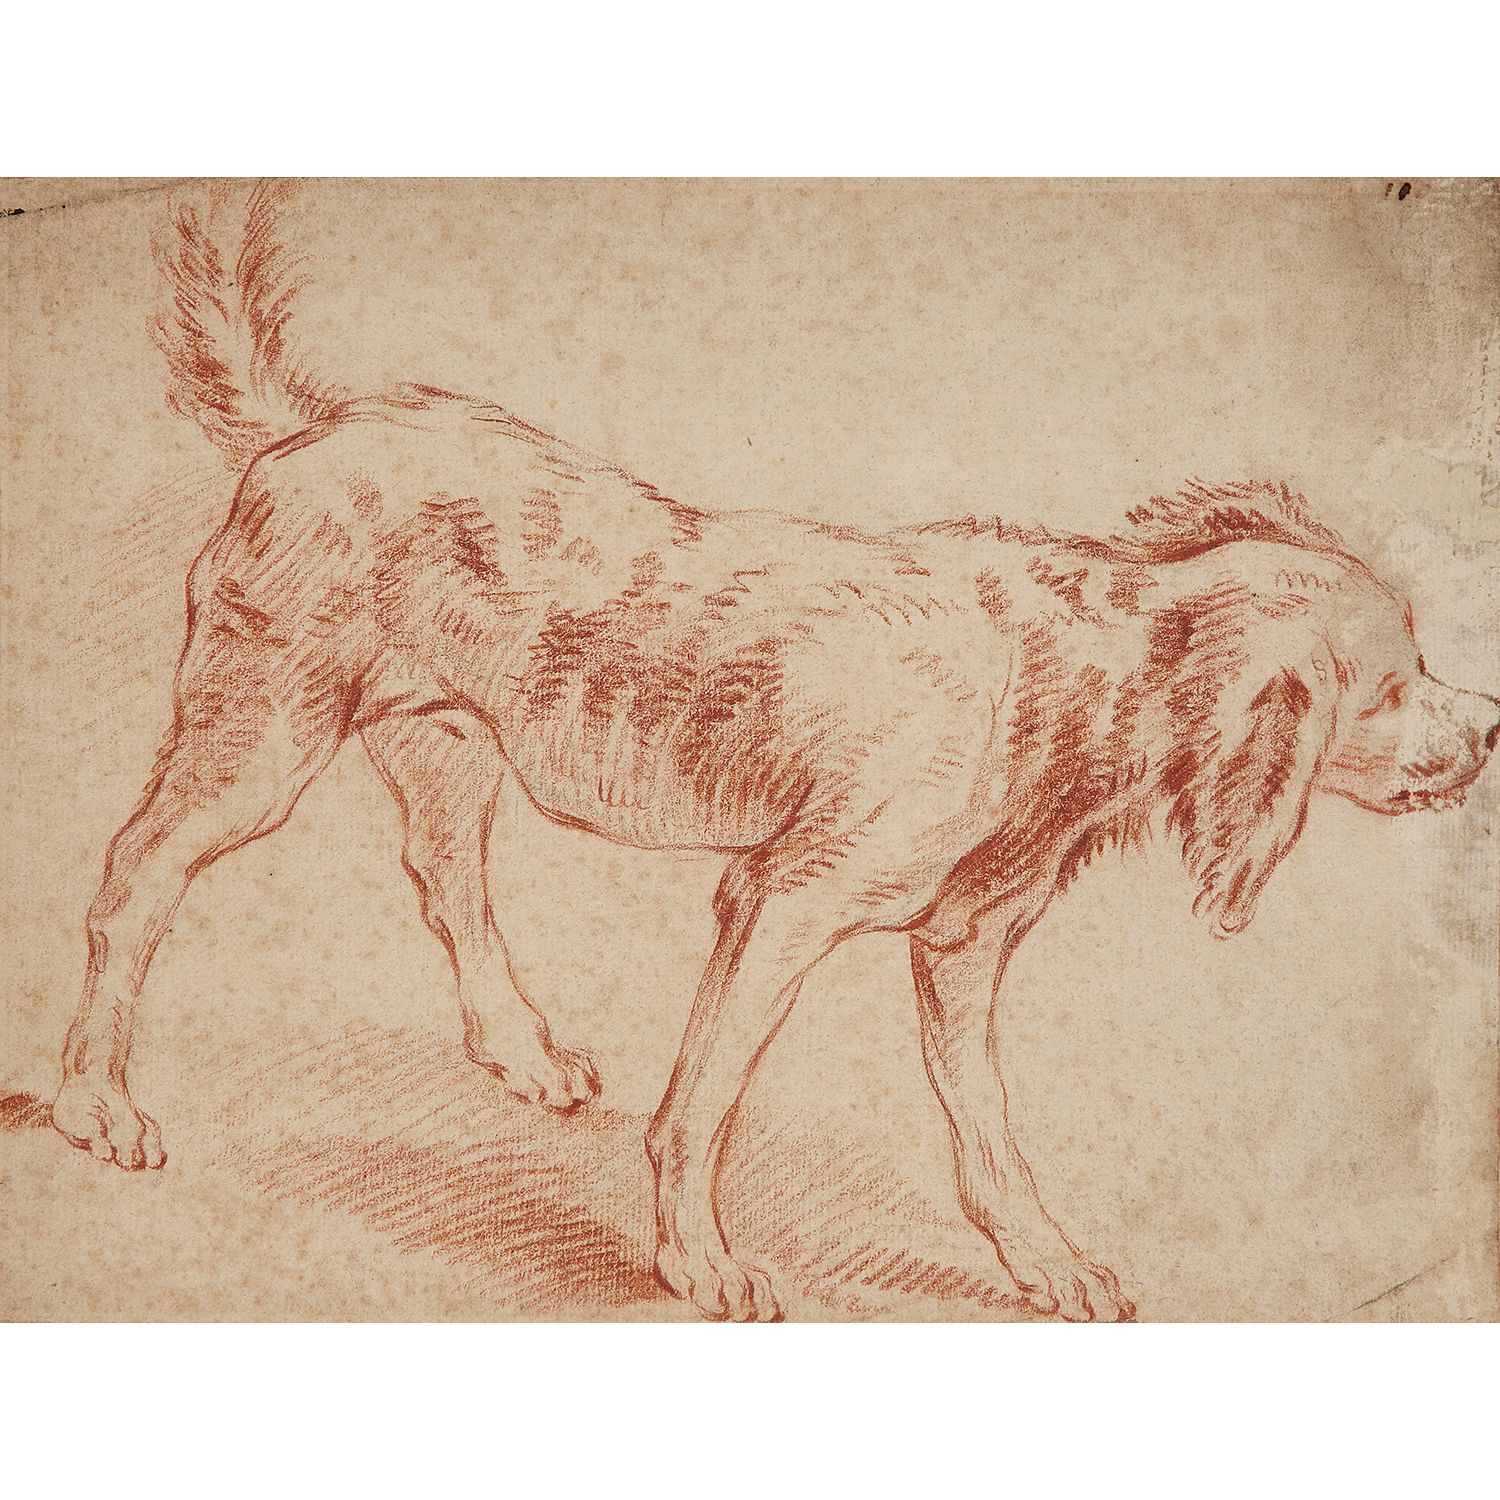 Null 18th century french school

STUDY OF A DOG

Sanguine

Lined, missing on the&hellip;